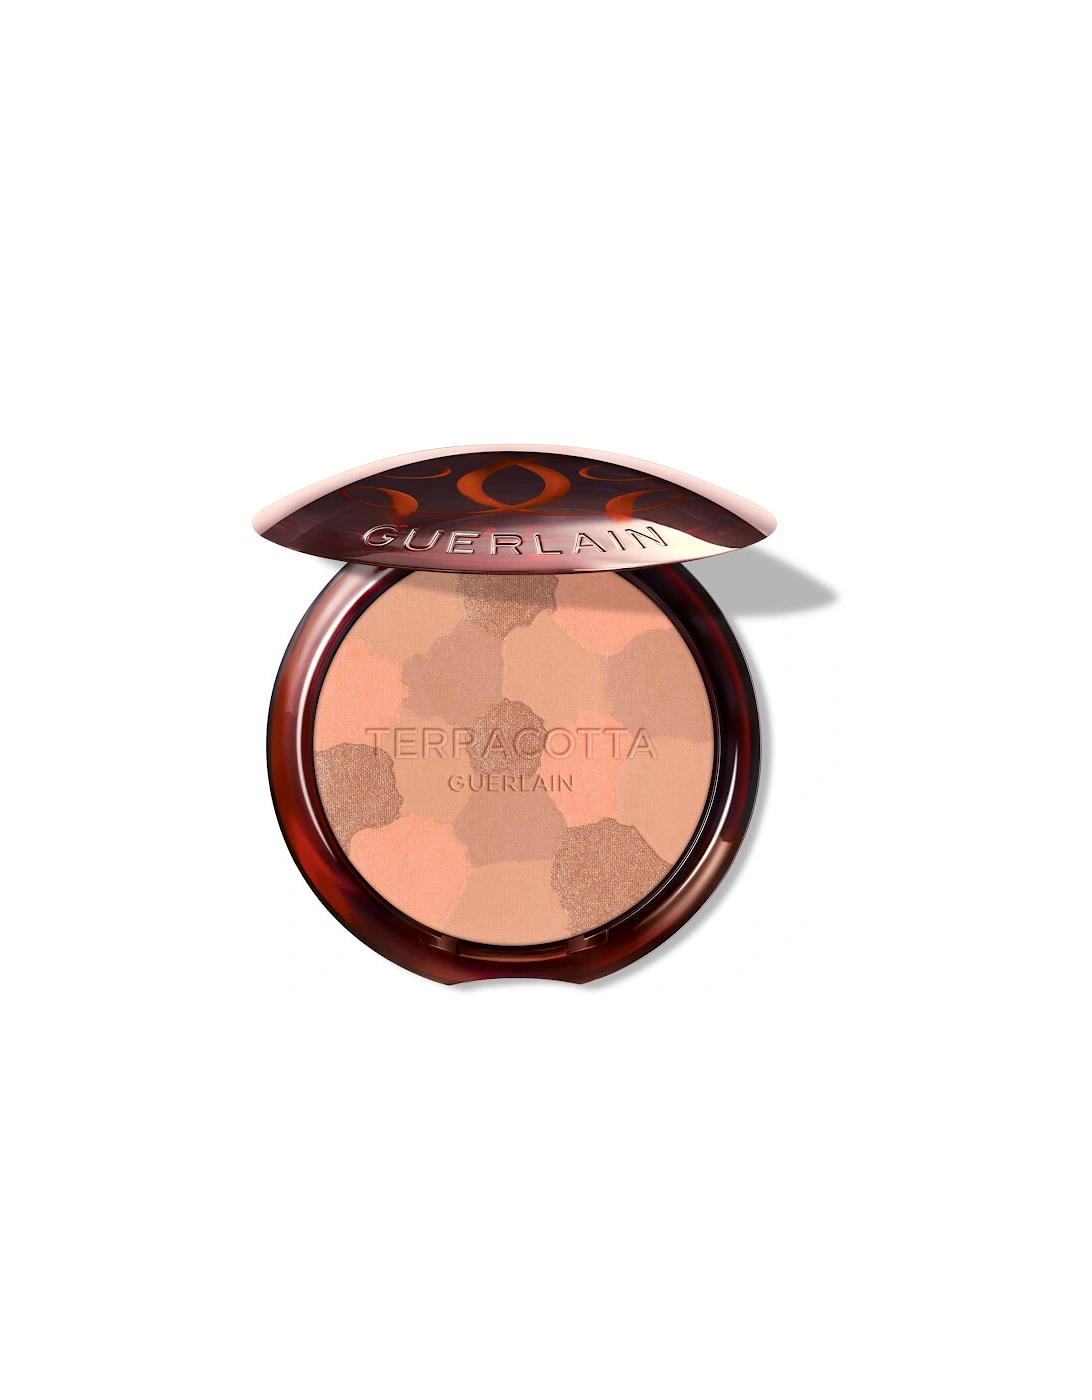 Terracotta Light The Sun-Kissed Natural Healthy Glow Powder - 01 Light Warm, 2 of 1